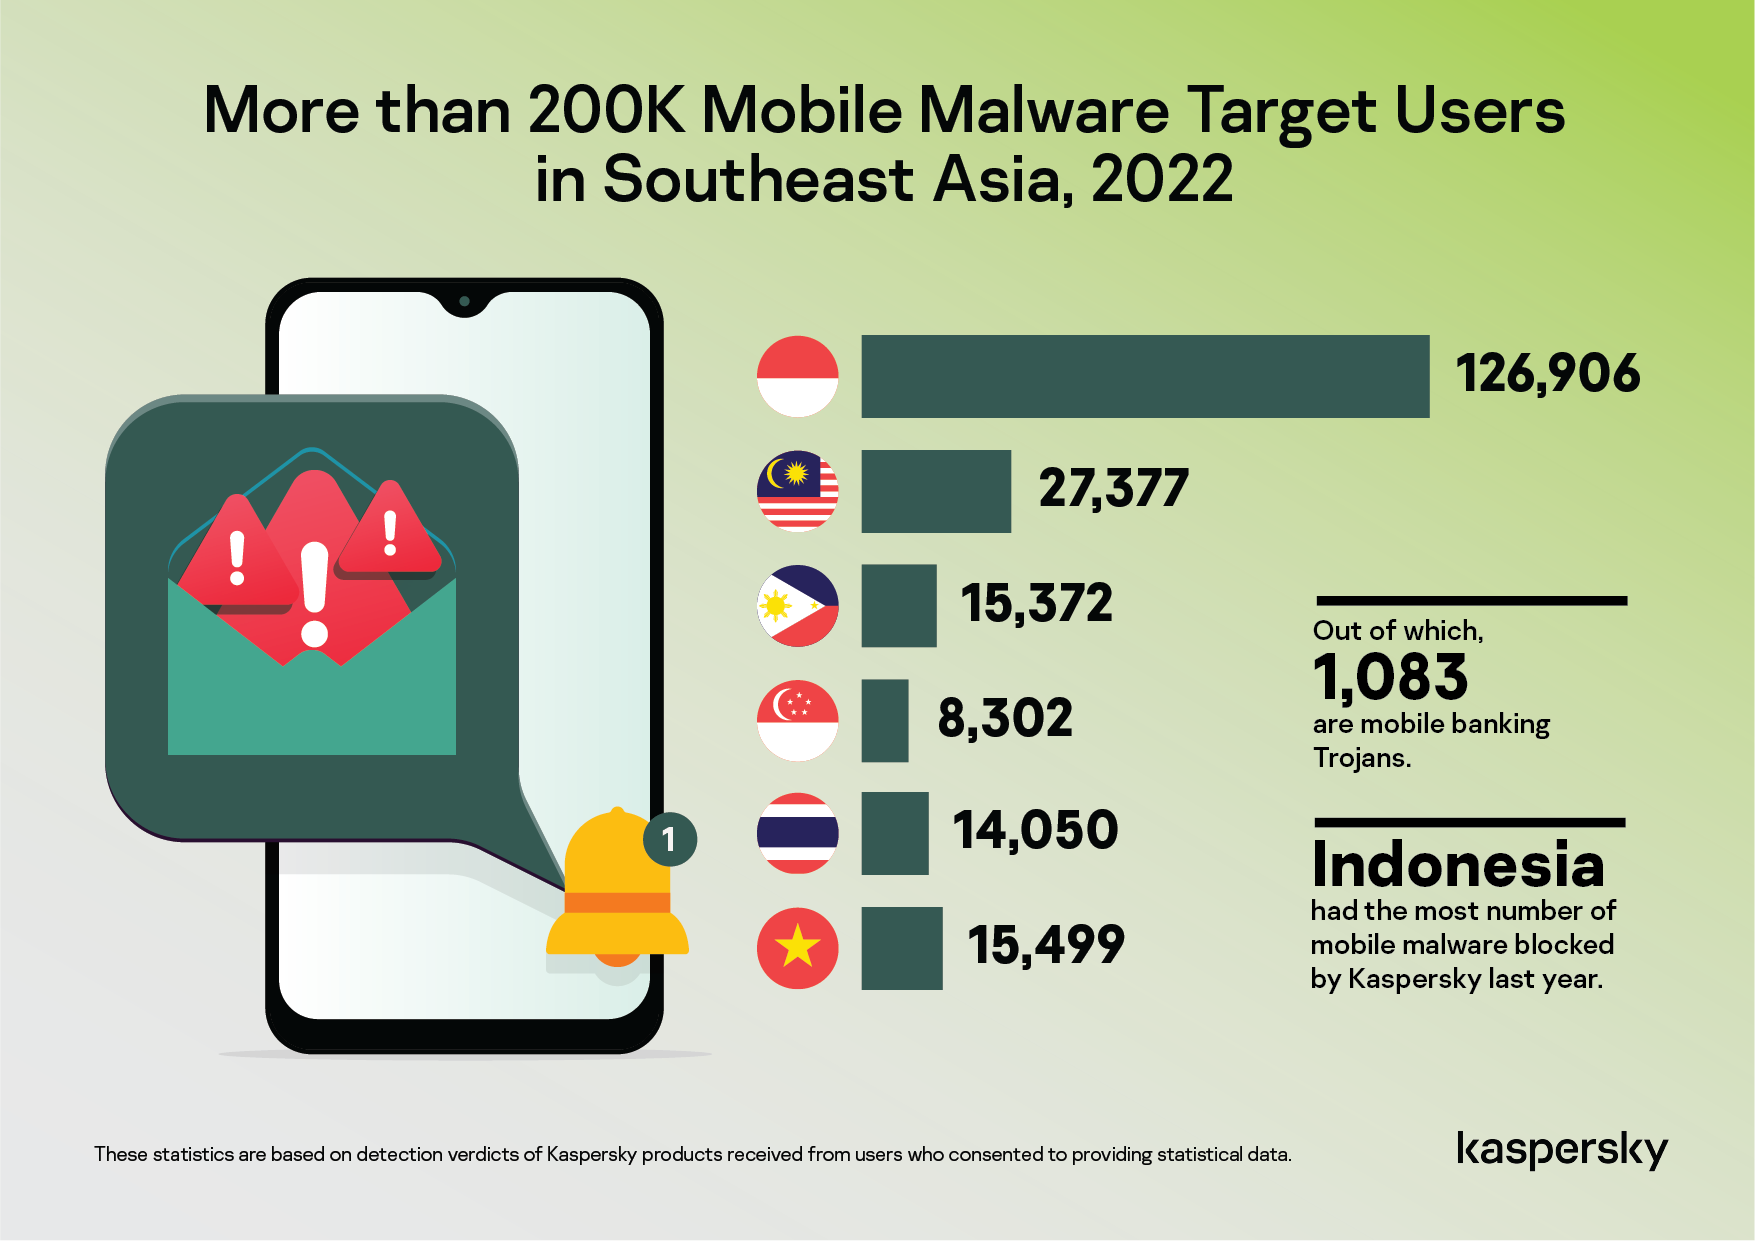 more-than-200k-mobile-malware-target-users-in-southeast-asia-2022_v2-02.png